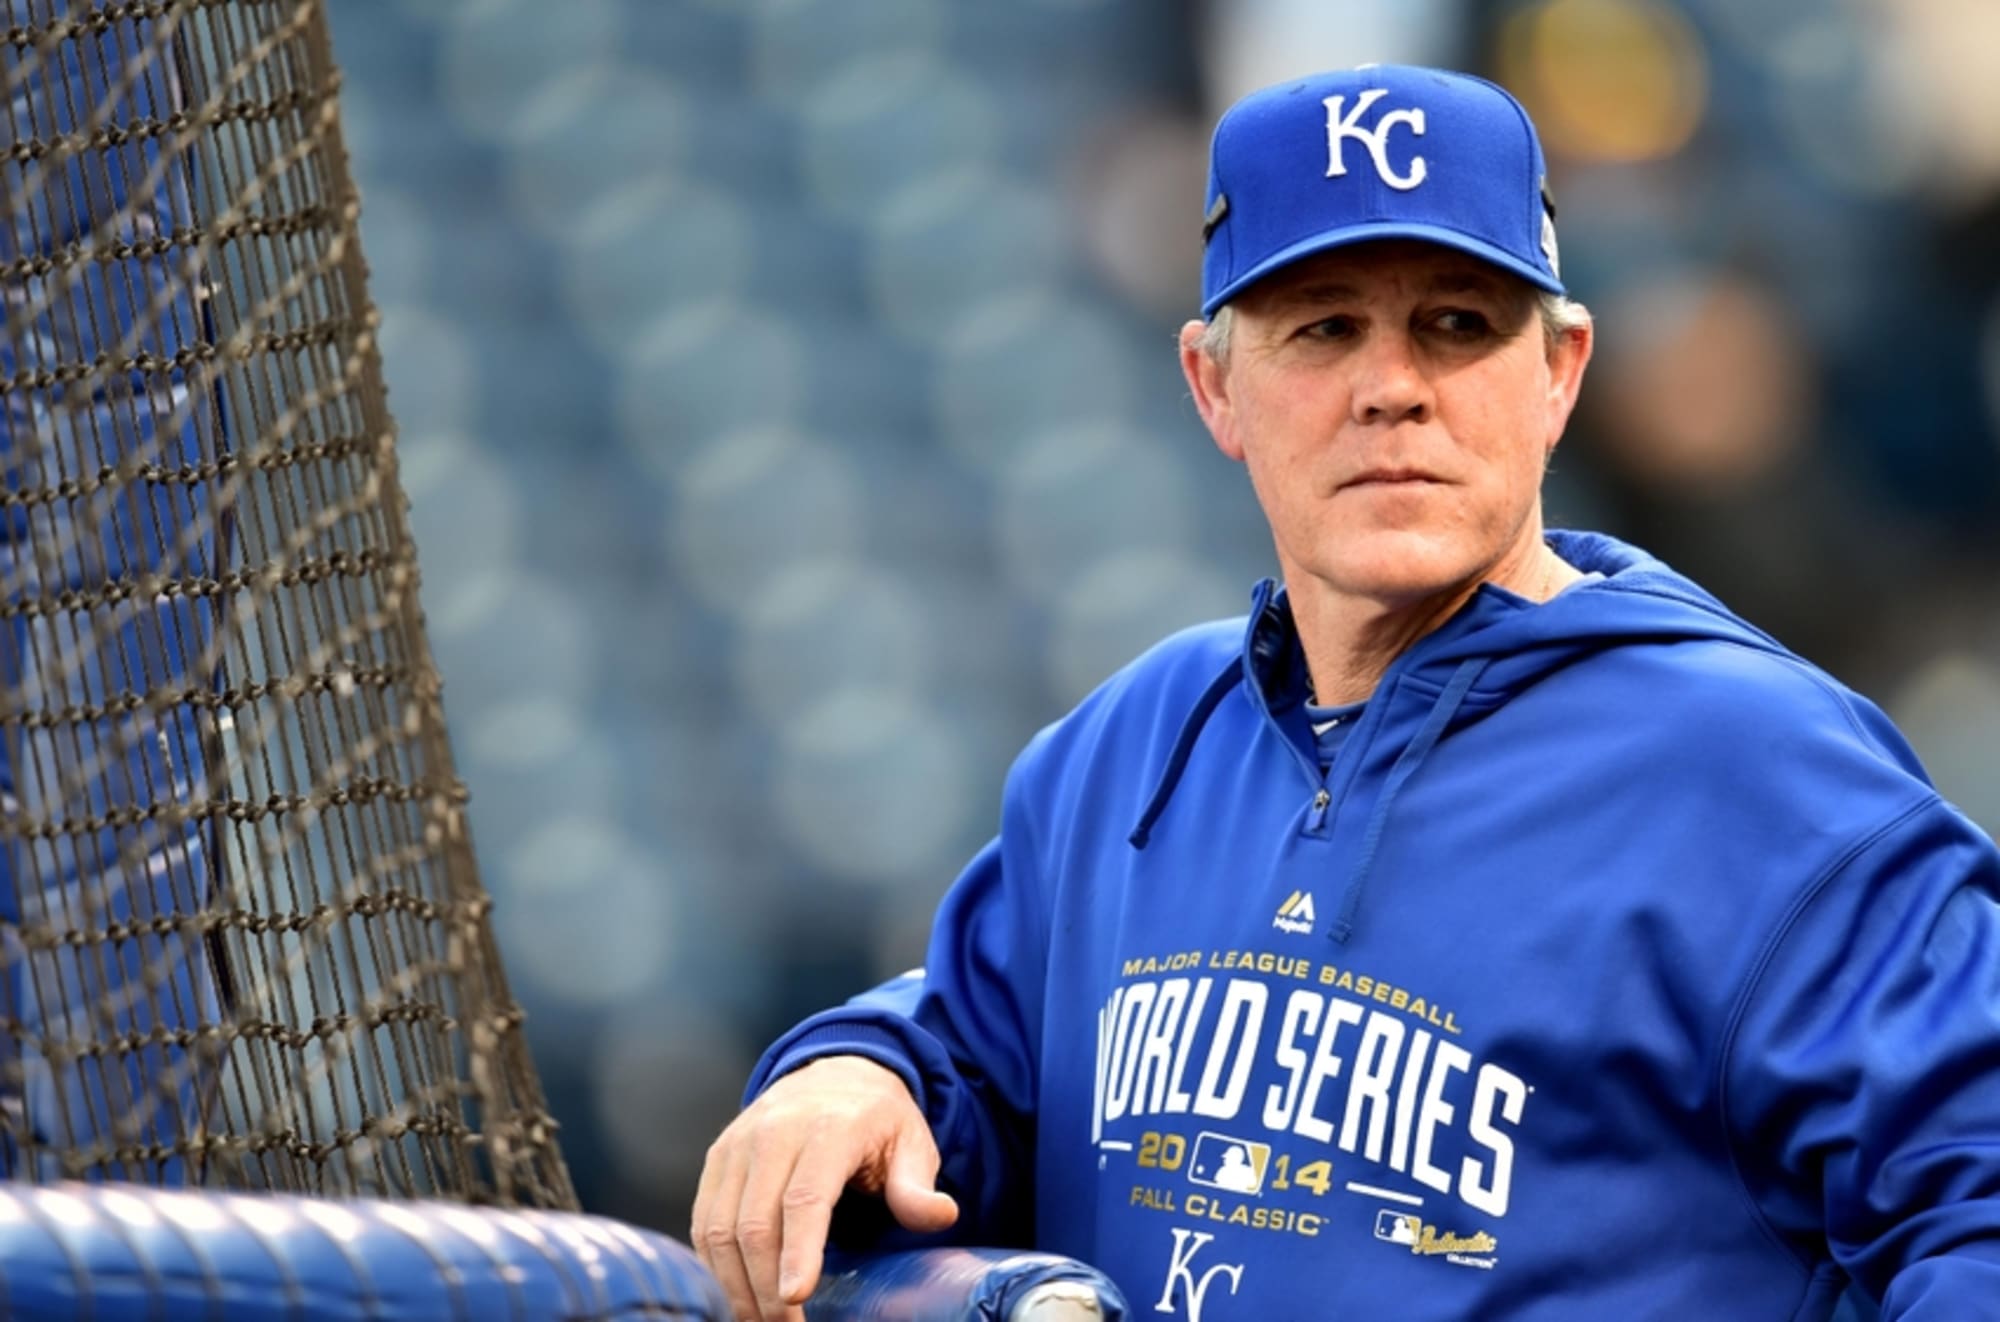 Kansas City Royals, manager Ned Yost extend deal by 1 year